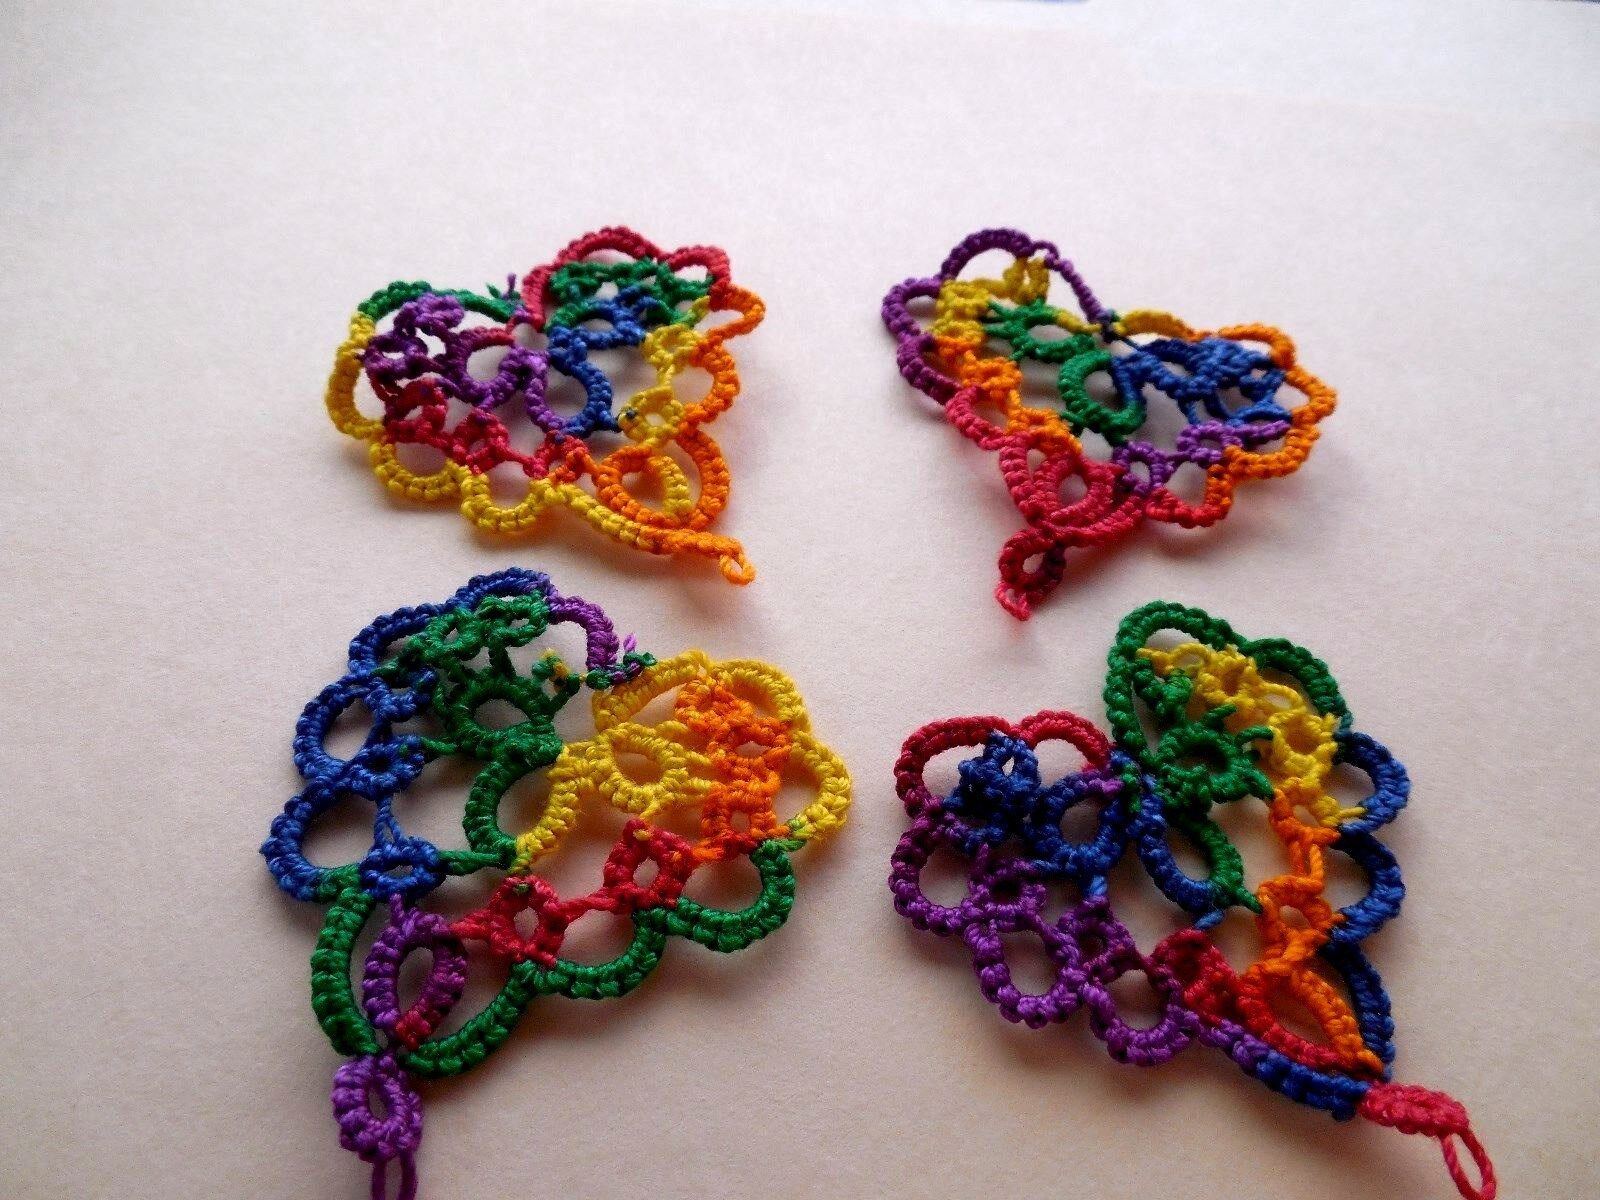 8 Tatted Festive Hearts Tatting Scrapbook Crazy Quilts Applique Cards Earrings